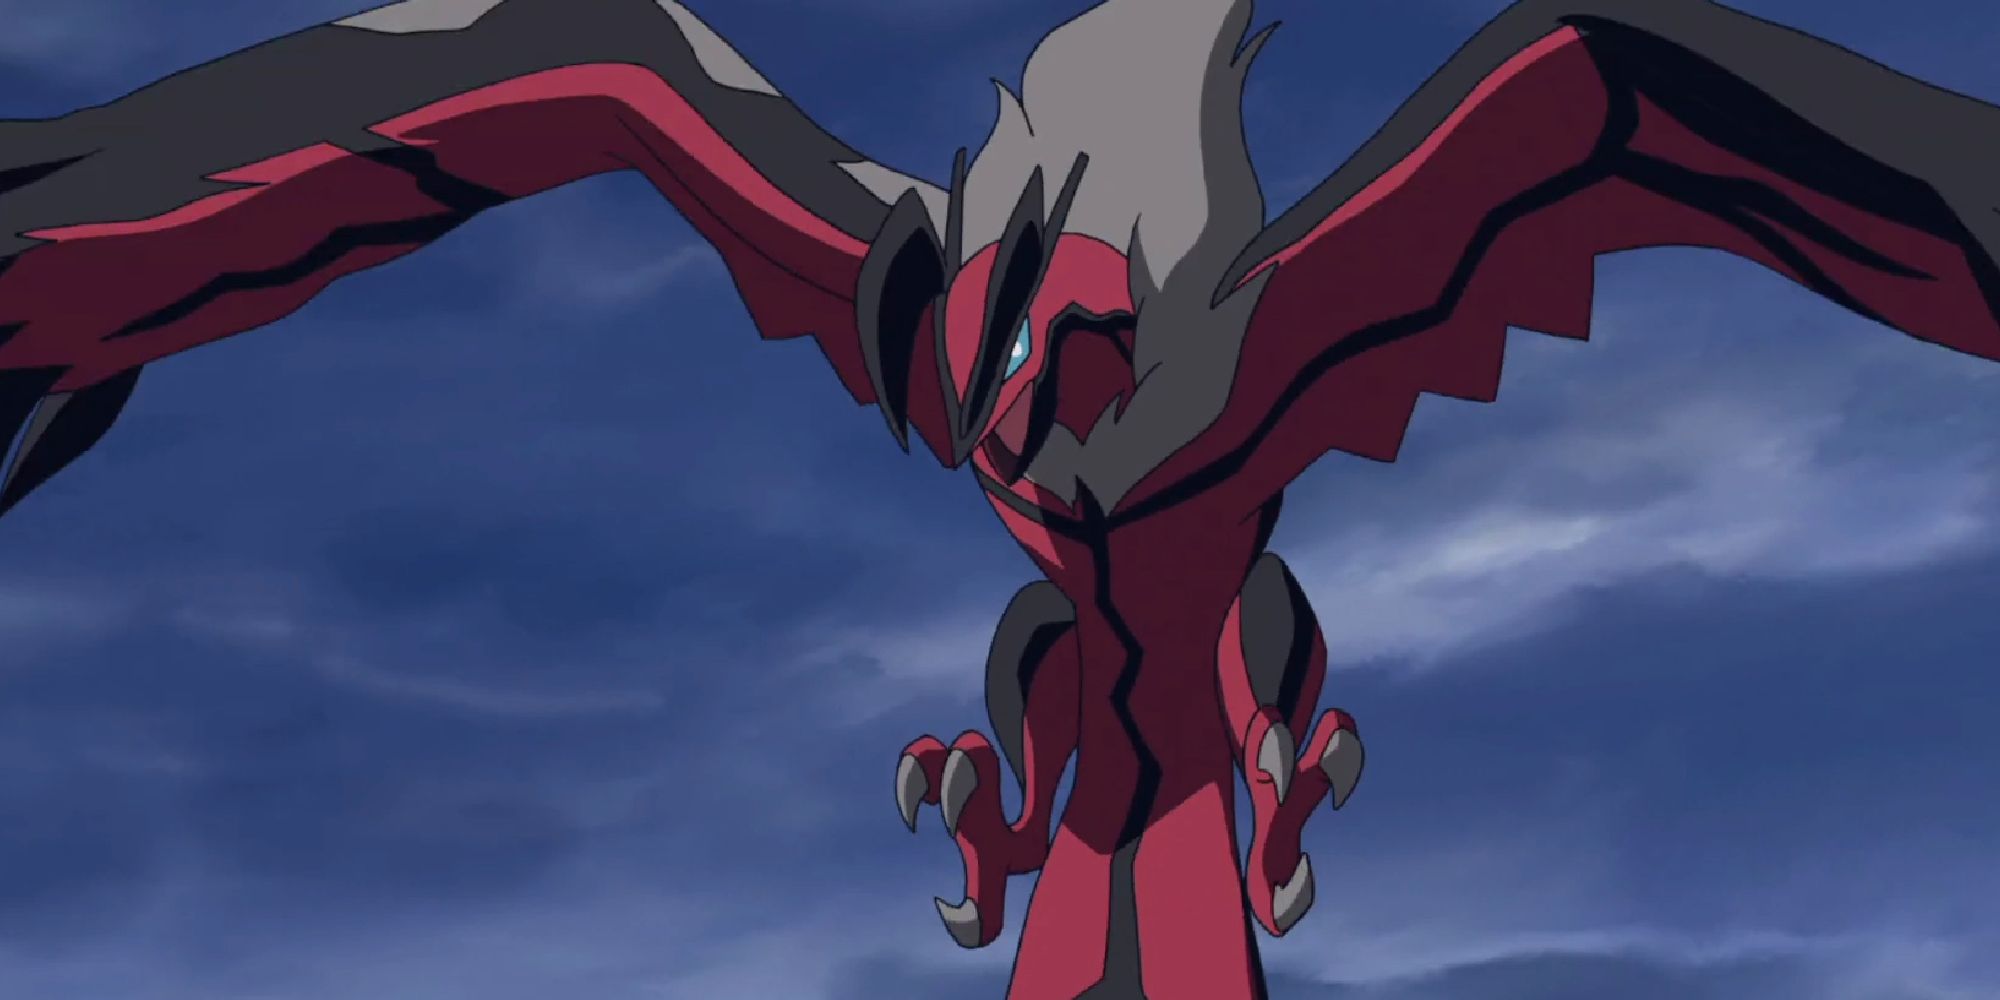 Yveltal flying through the air in the anime